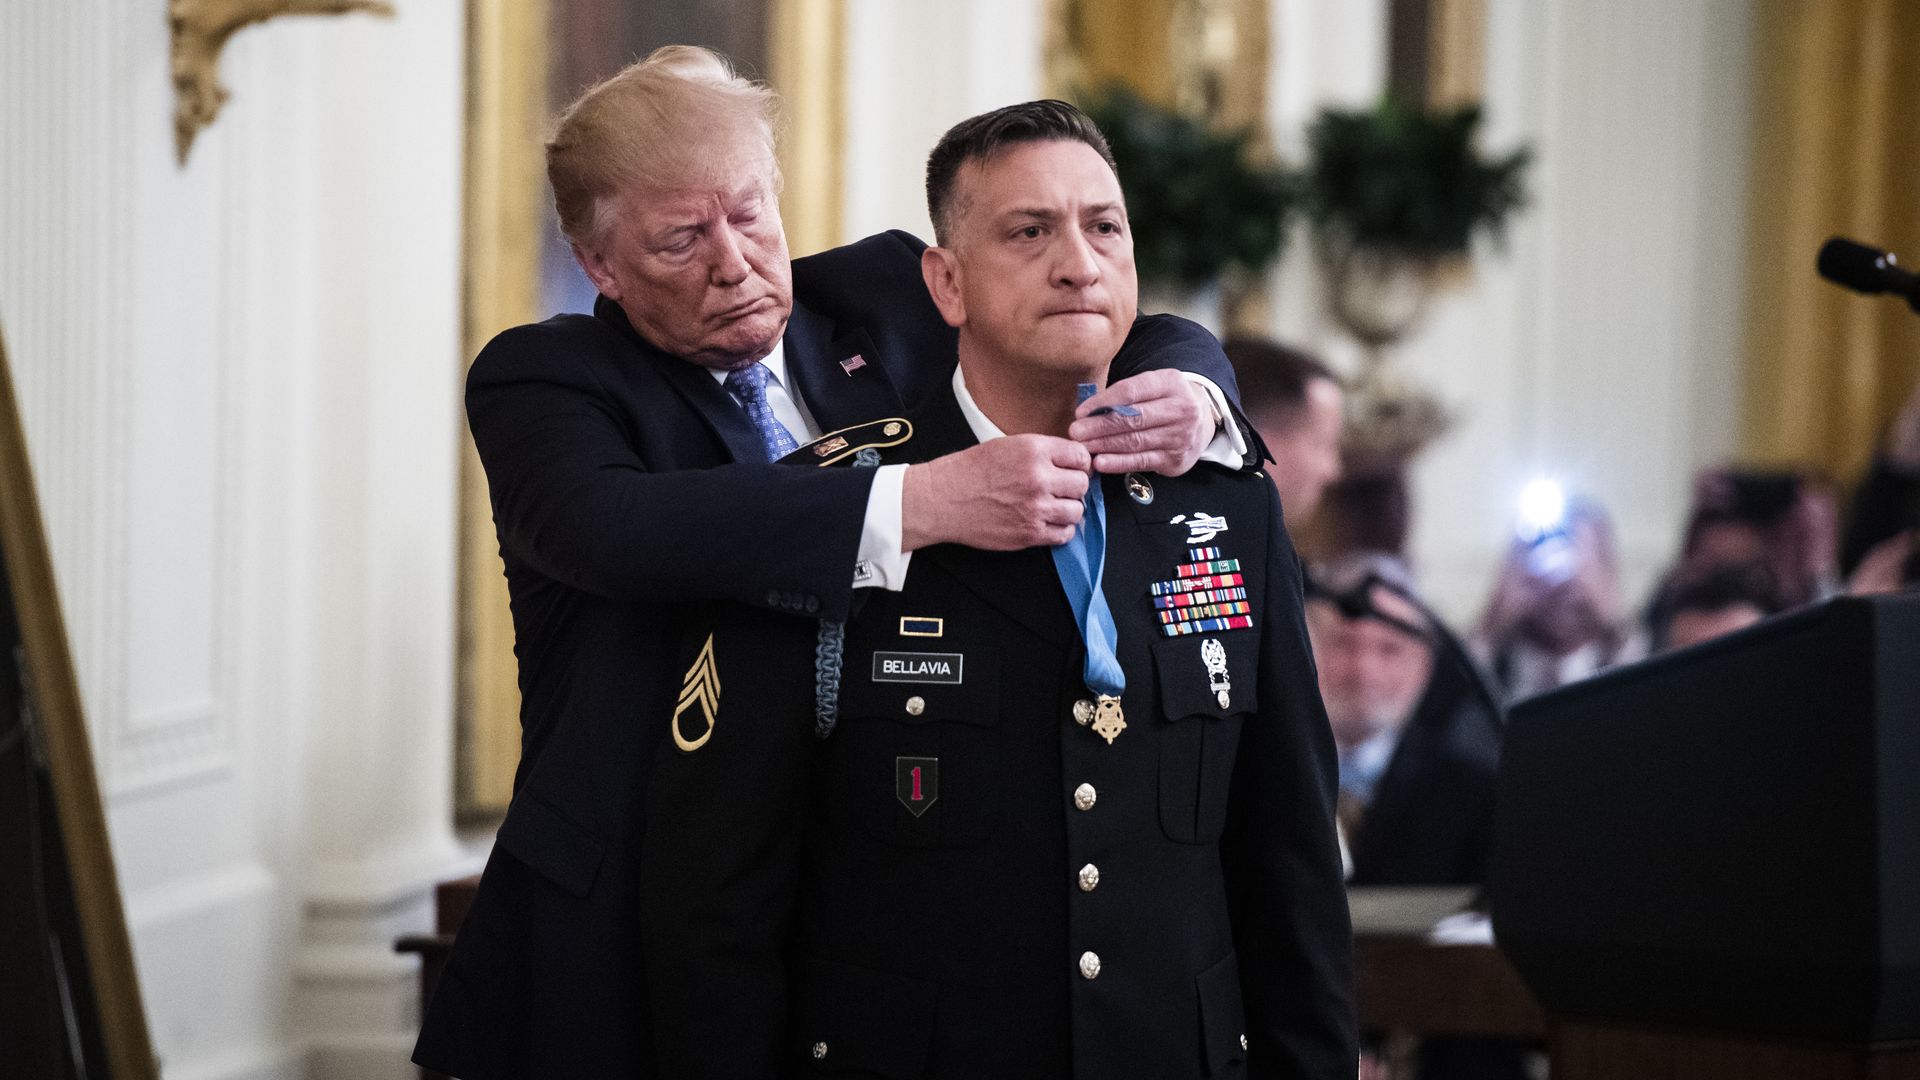 President Donald J. Trump participates in a ceremony to award the Medal of Honor to Army Staff Sgt. David Bellavia in the East Room at the White House on Tuesday, June 25, 2019 in Washington, DC.